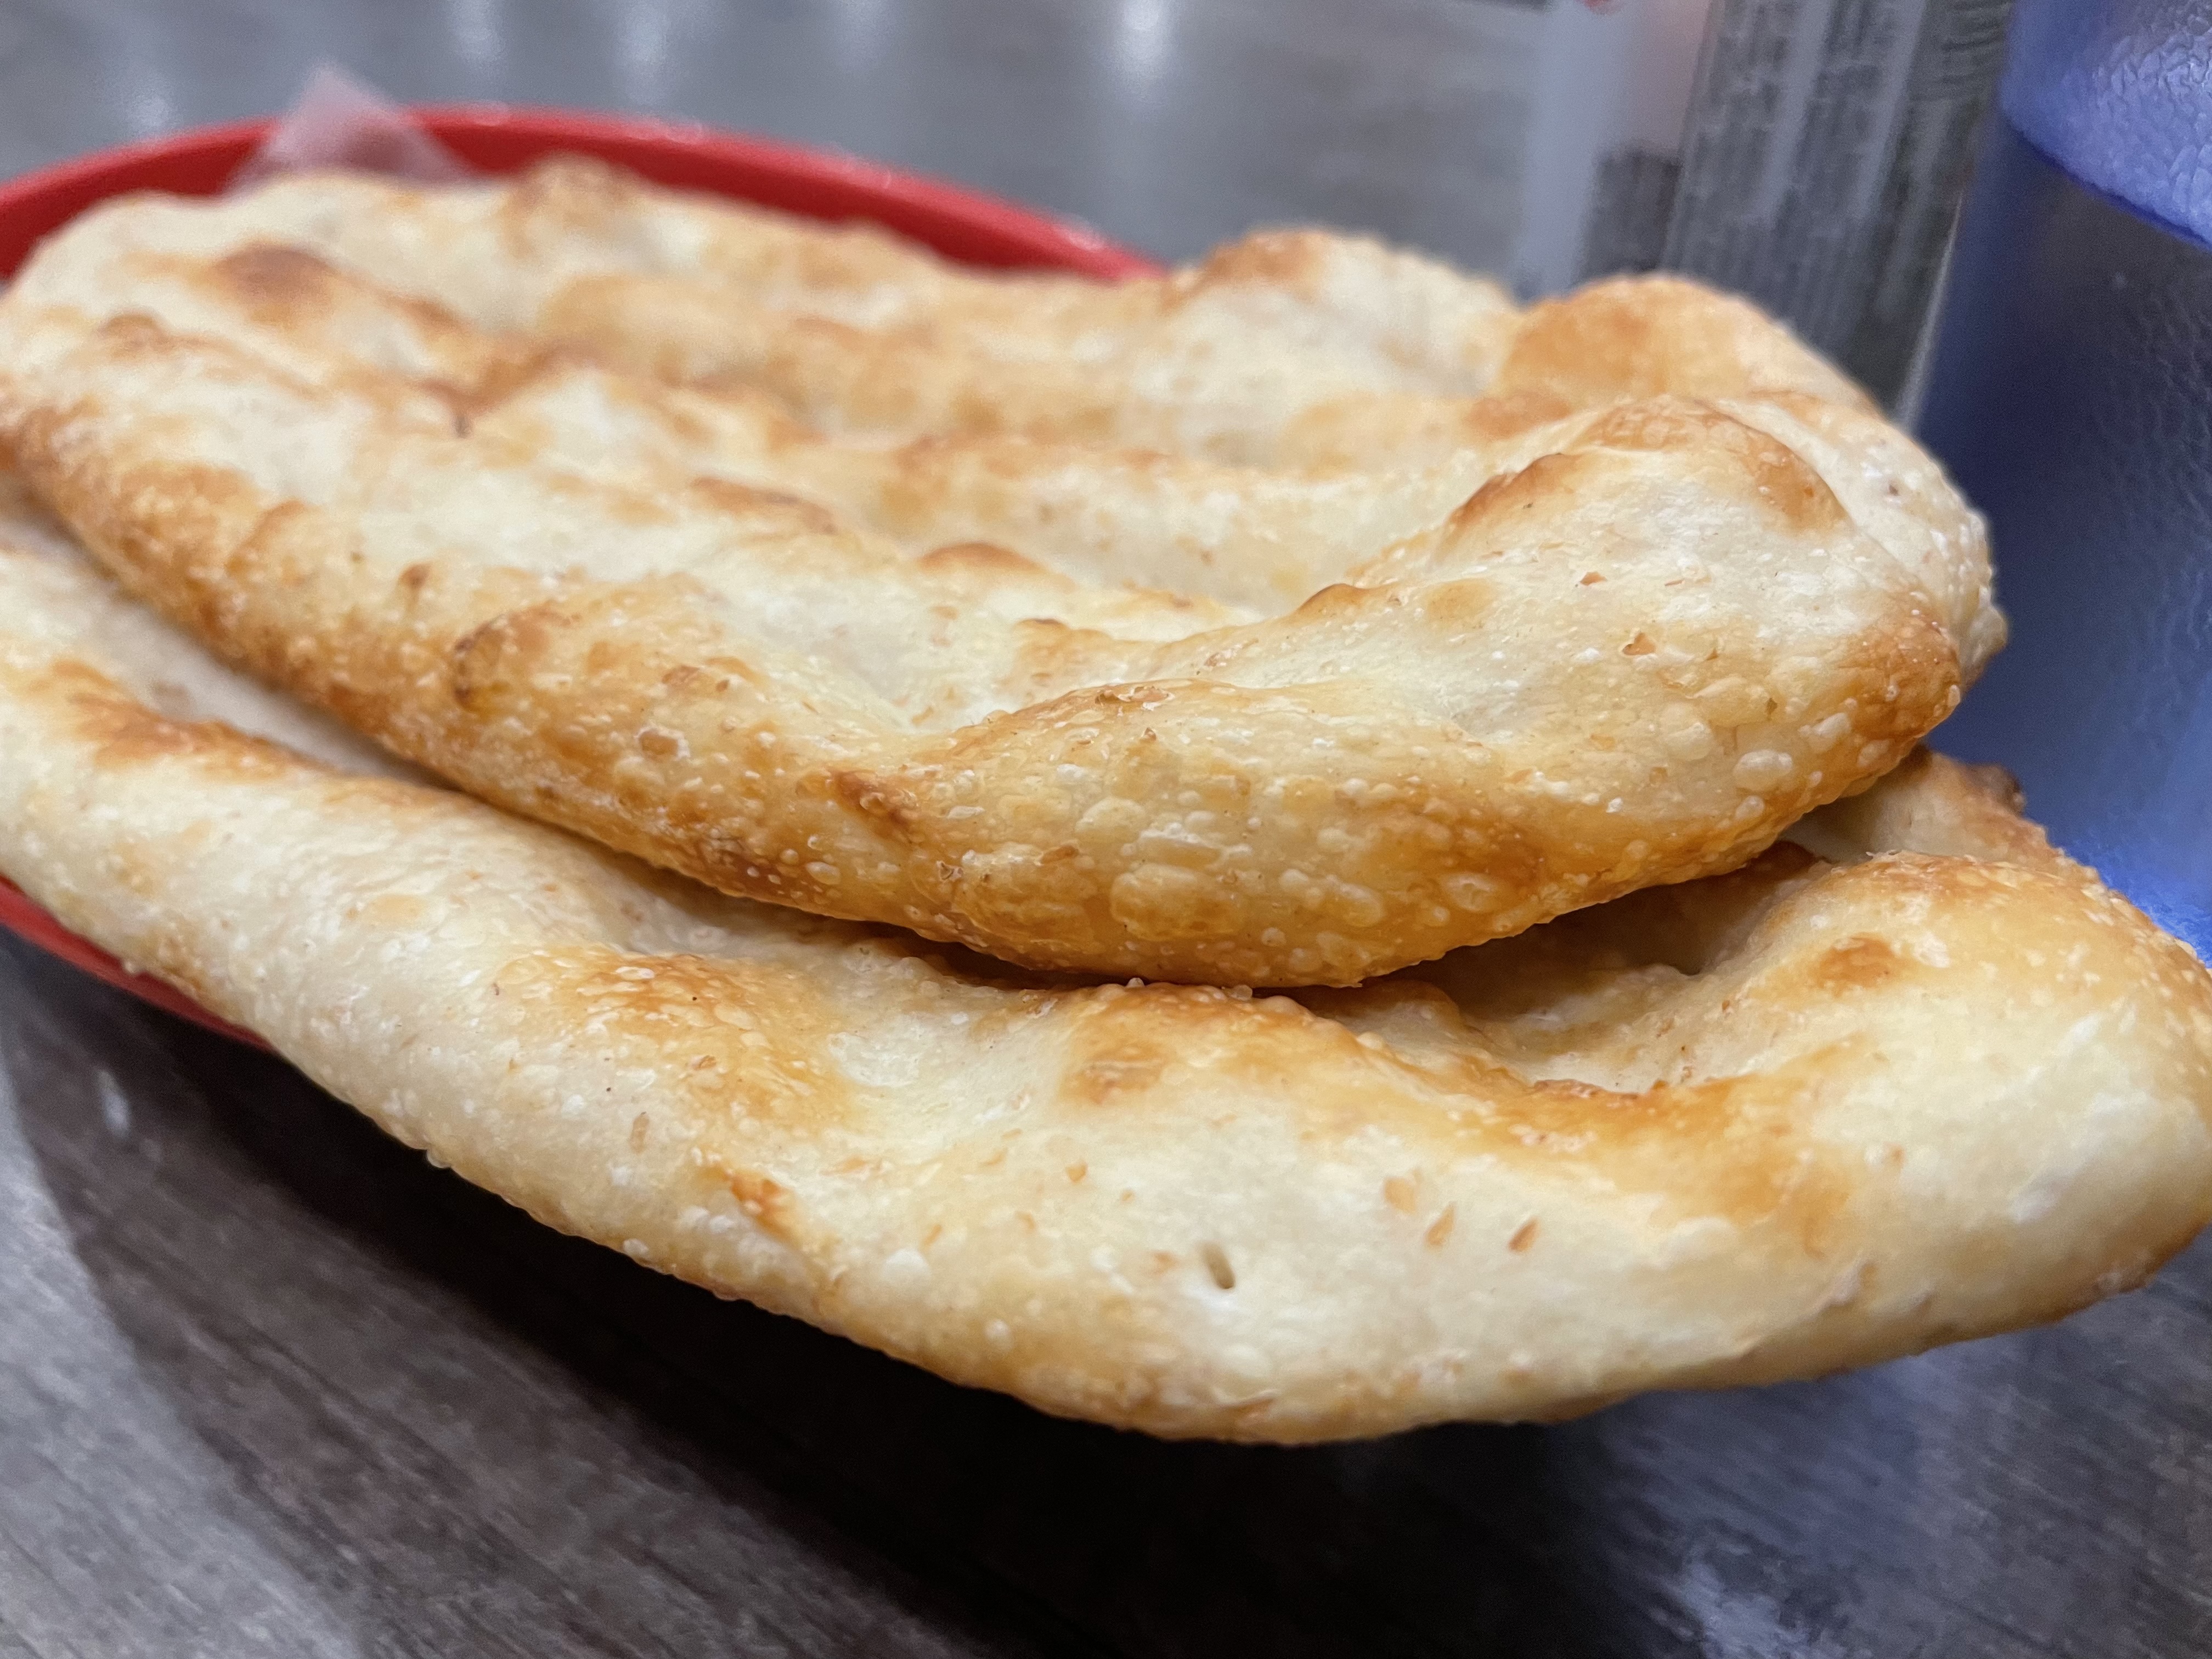 The "snowshoe naan" launched me right back to my childhood in a Delhi neighbourhood known for its Afghan food